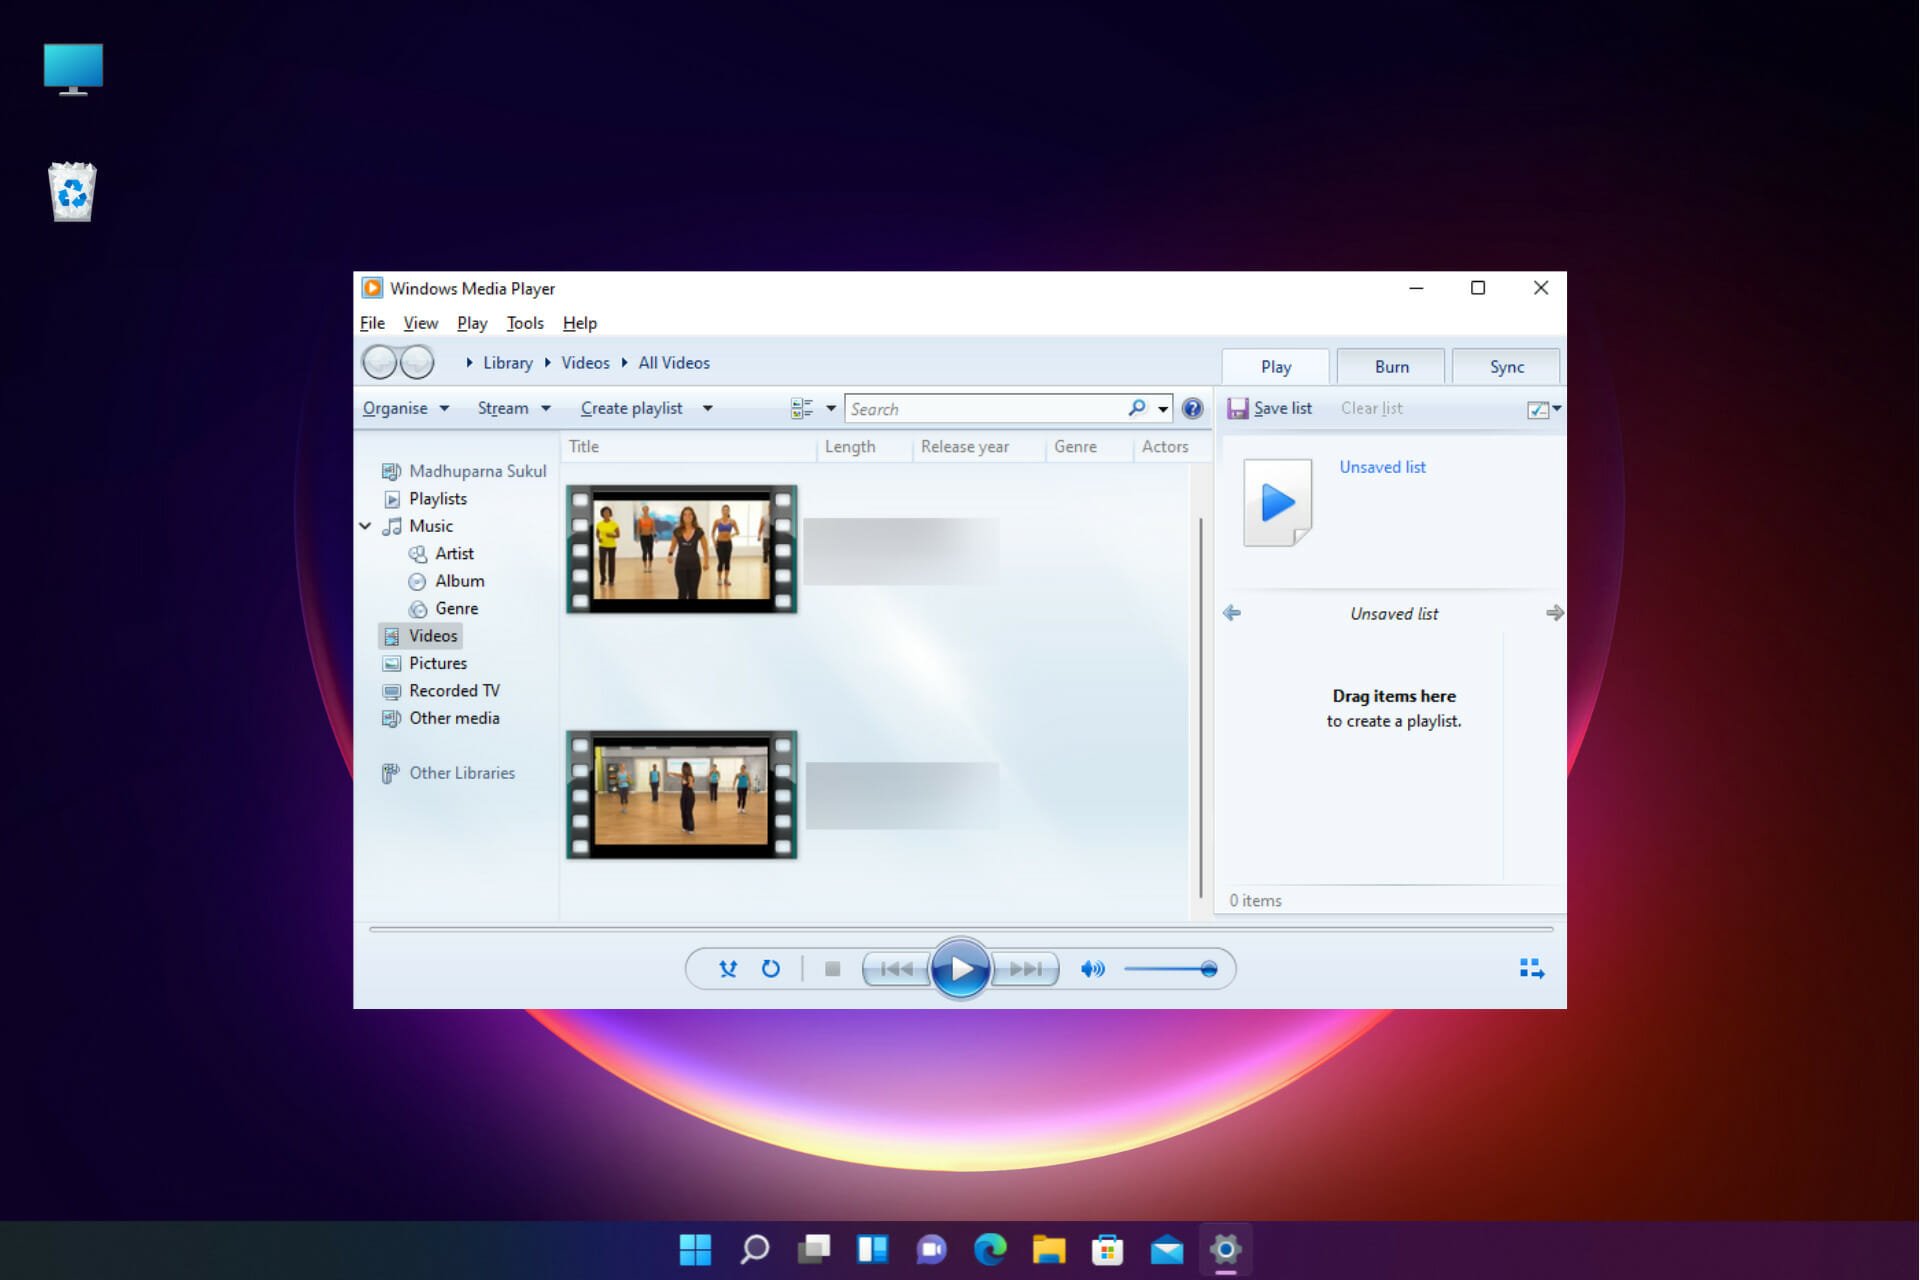 Play .mov files in WMV format on Windows Media Player